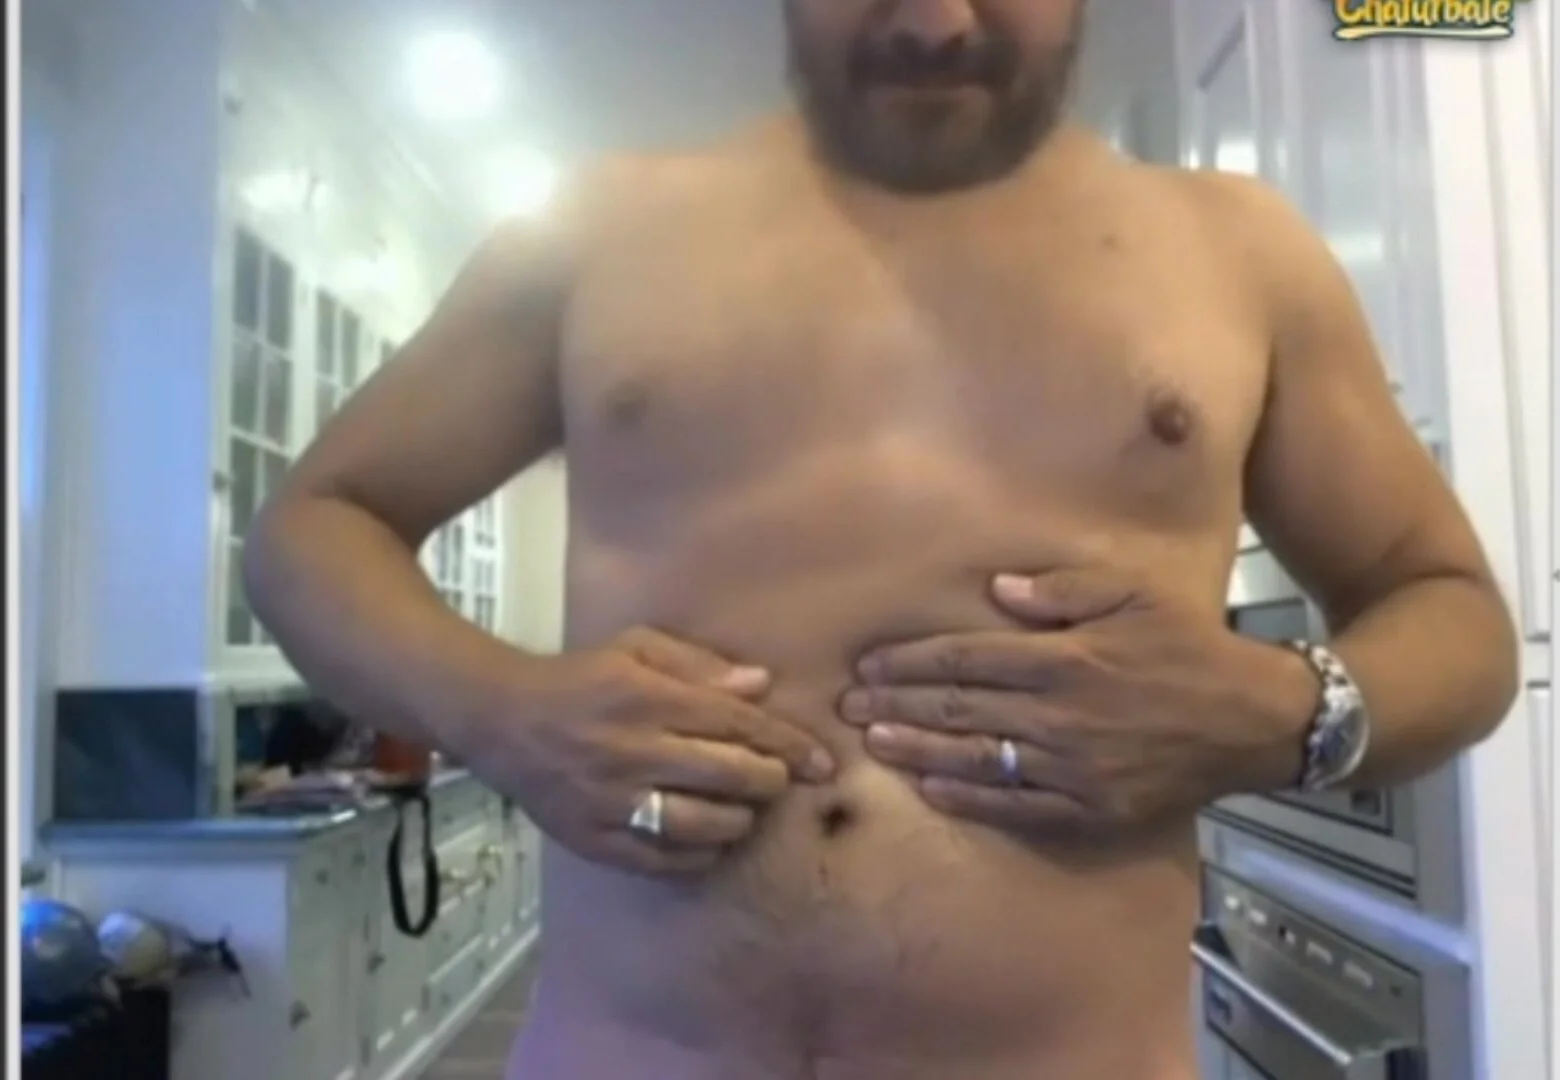 Men picking their belly buttons on live cams - ThisVid.com